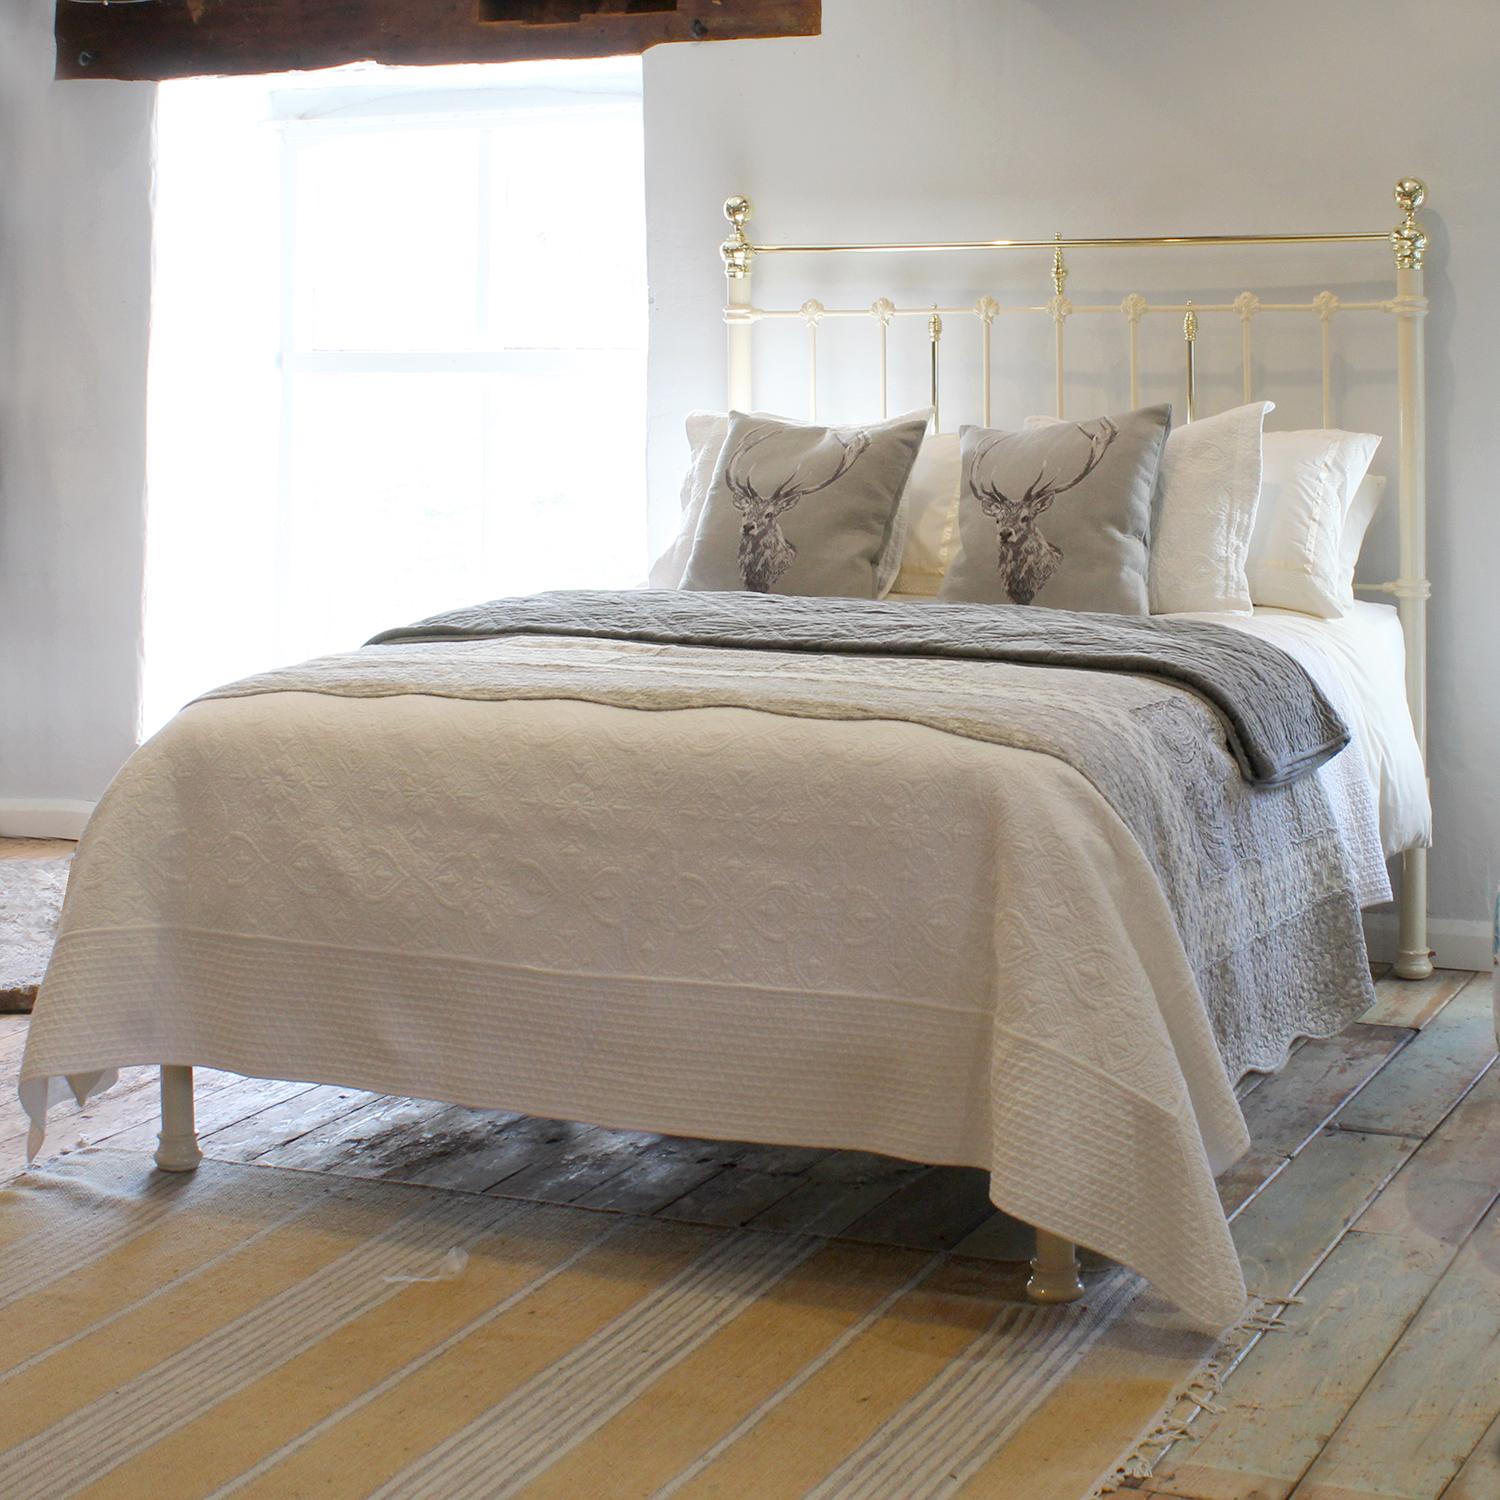 A fine example of an antique brass and iron bed finished in cream with straight brass top rail and low foot board.

This bed accepts a UK King or US Queen, 5ft or 60in wide, mattress and base.

The price also includes a firm bed base to support the